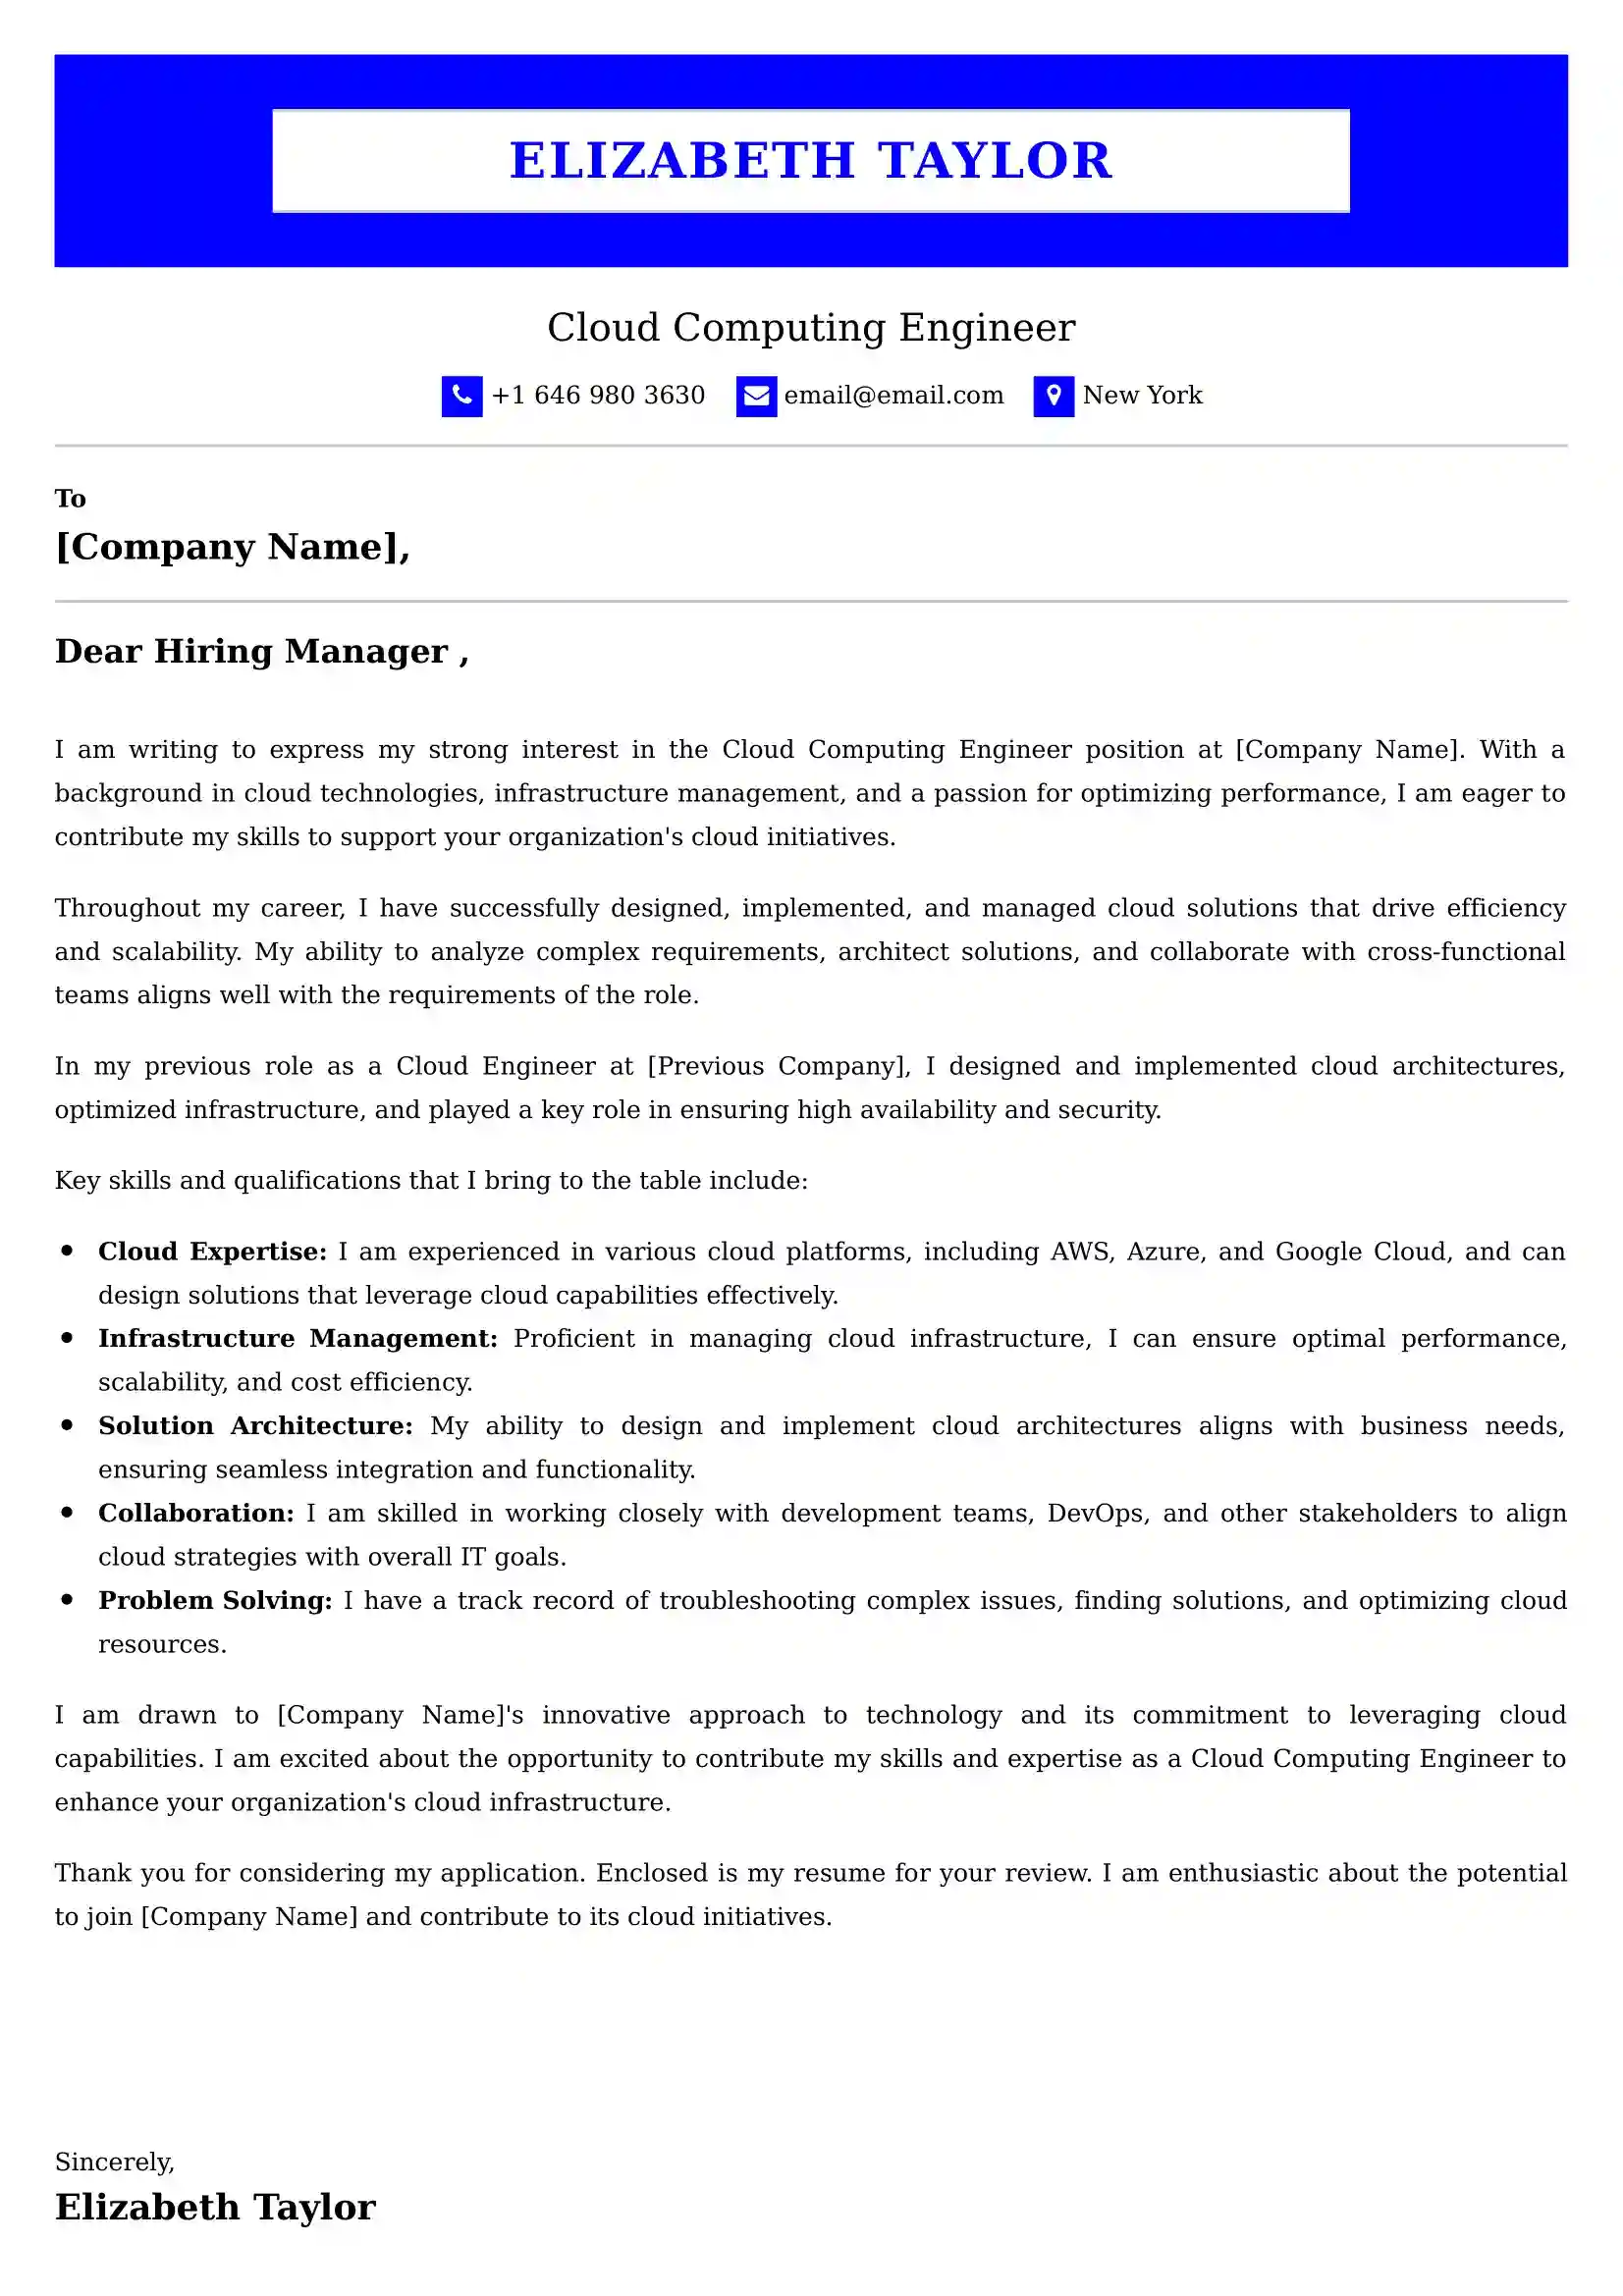 Cloud Computing Engineer Cover Letter Examples Australia